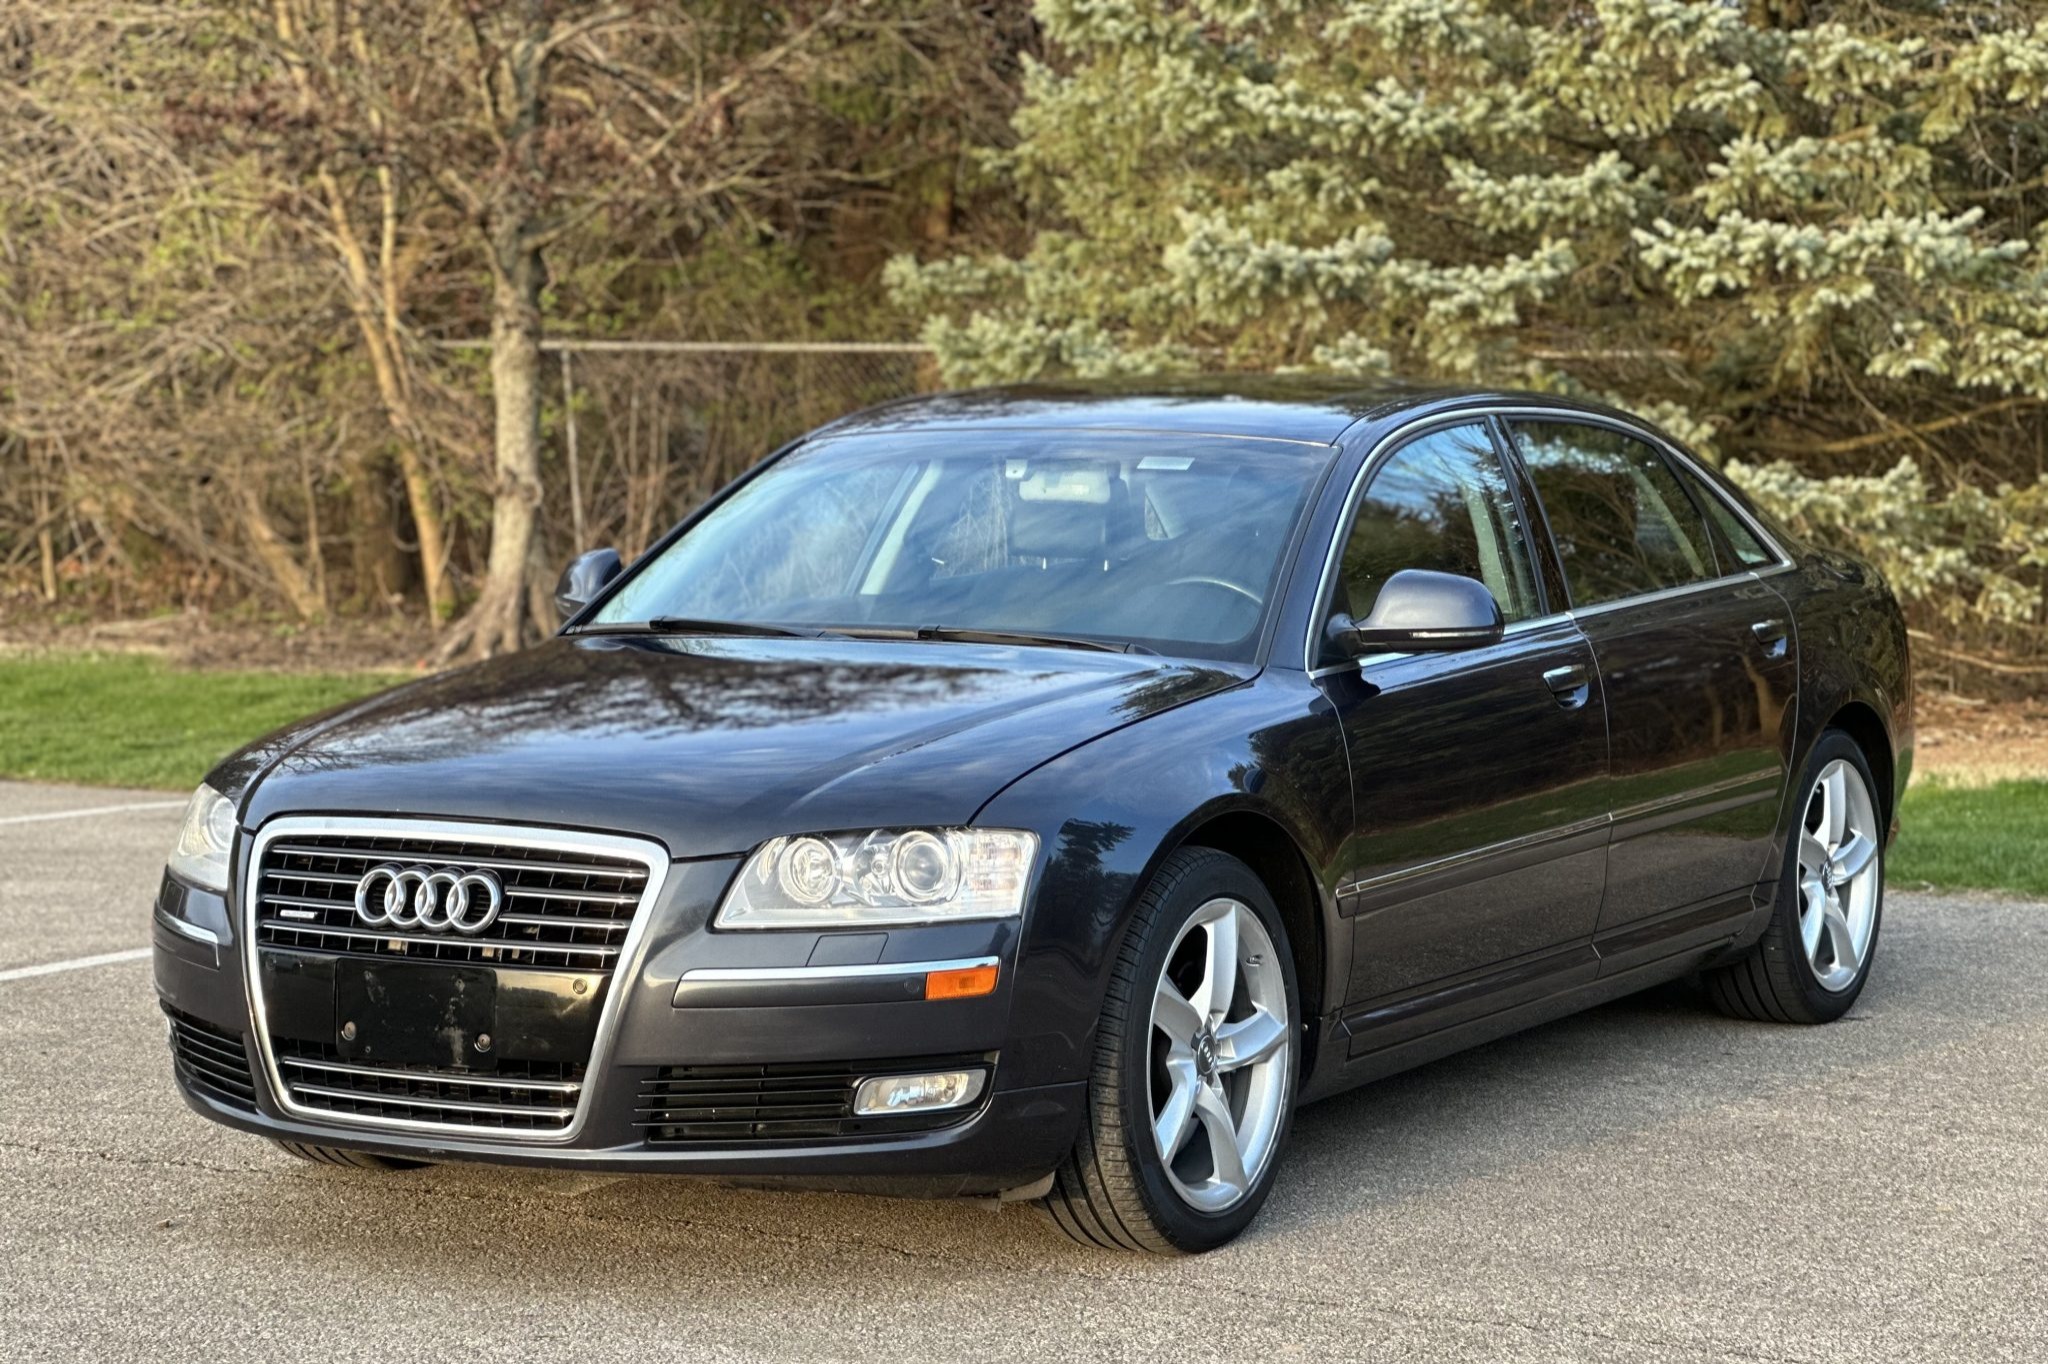 Used 2008 Audi A8L Review